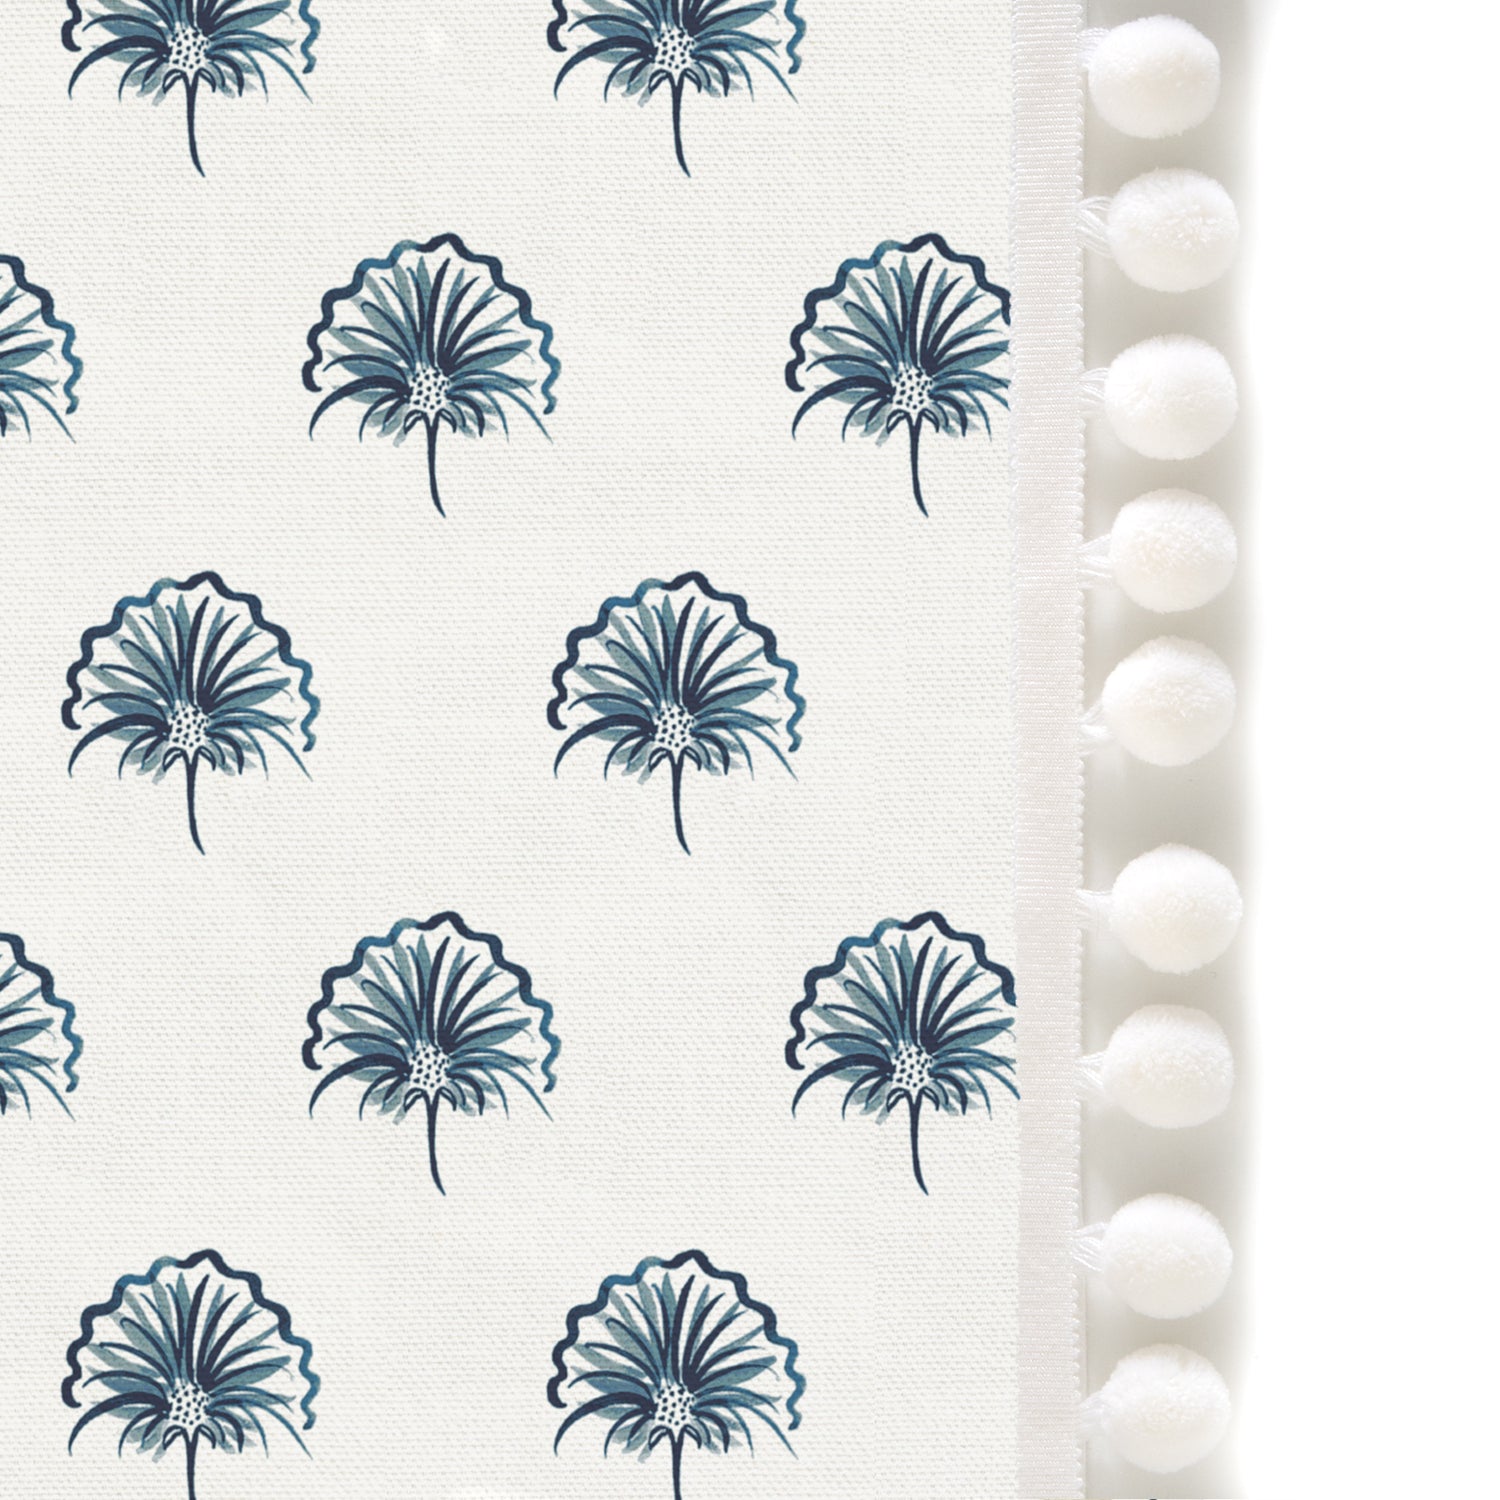 Upclose picture of Penelope Midnight custom Floral Navyshower curtain with snow pom pom trim